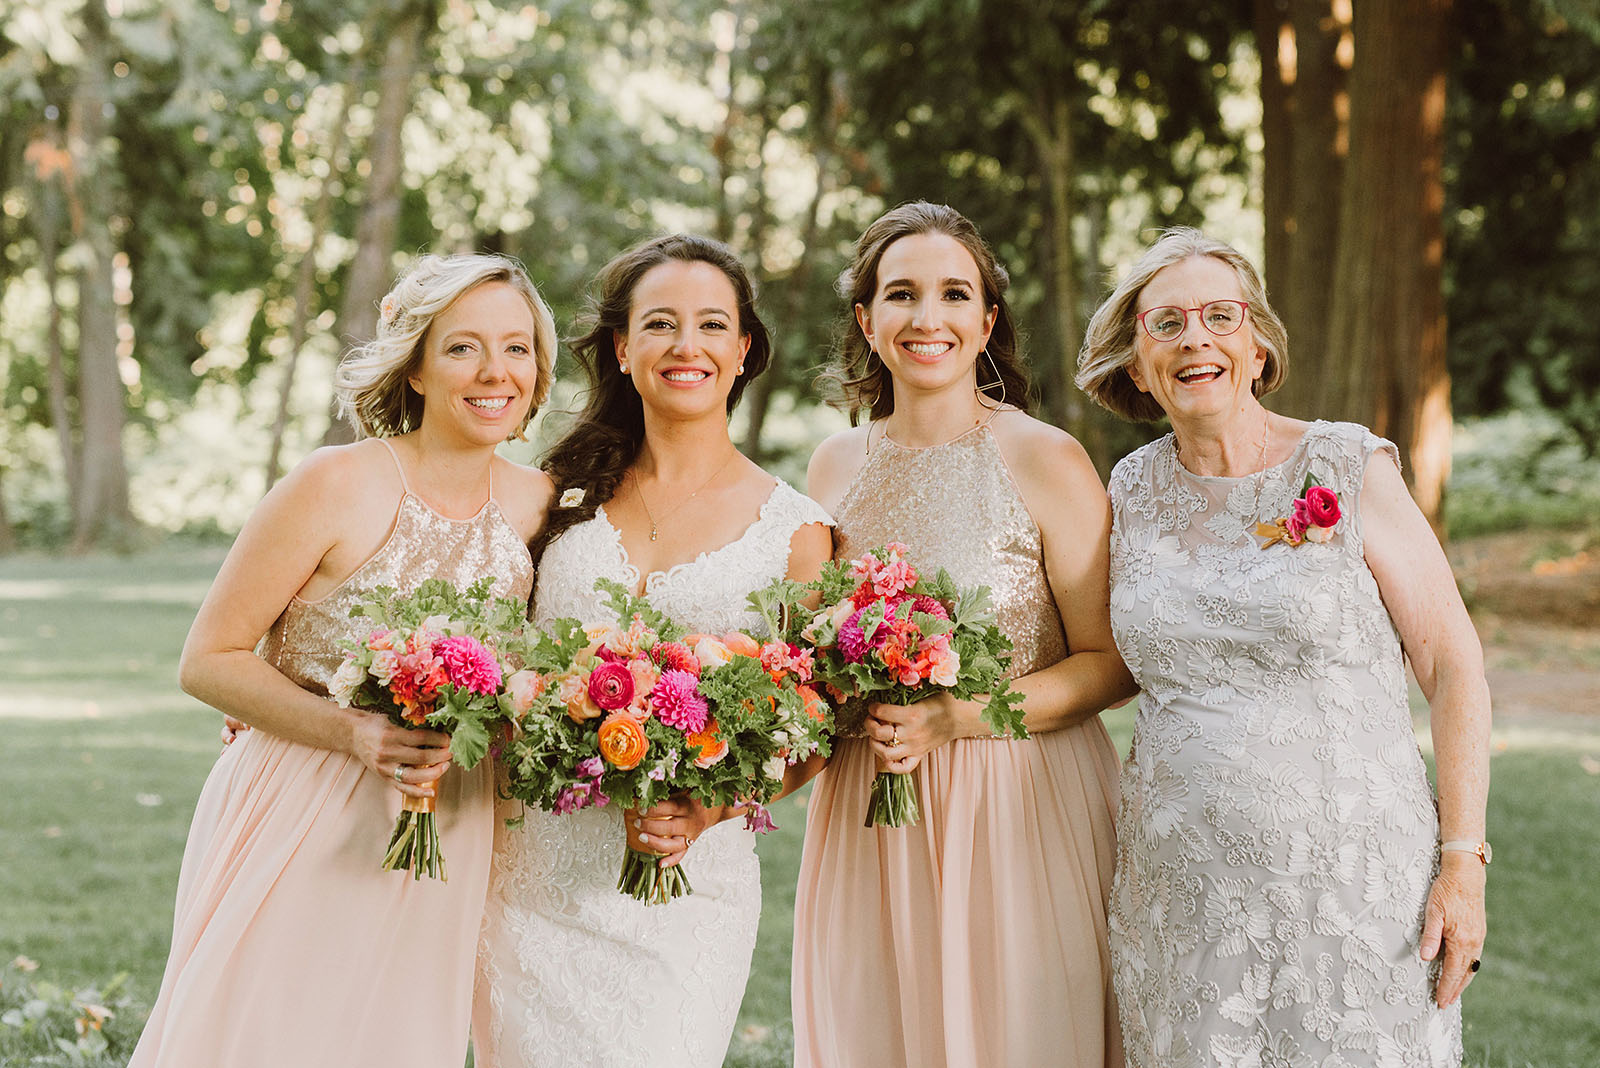 Bride posing with her family in the forest grove at a Cedarville Lodge Wedding